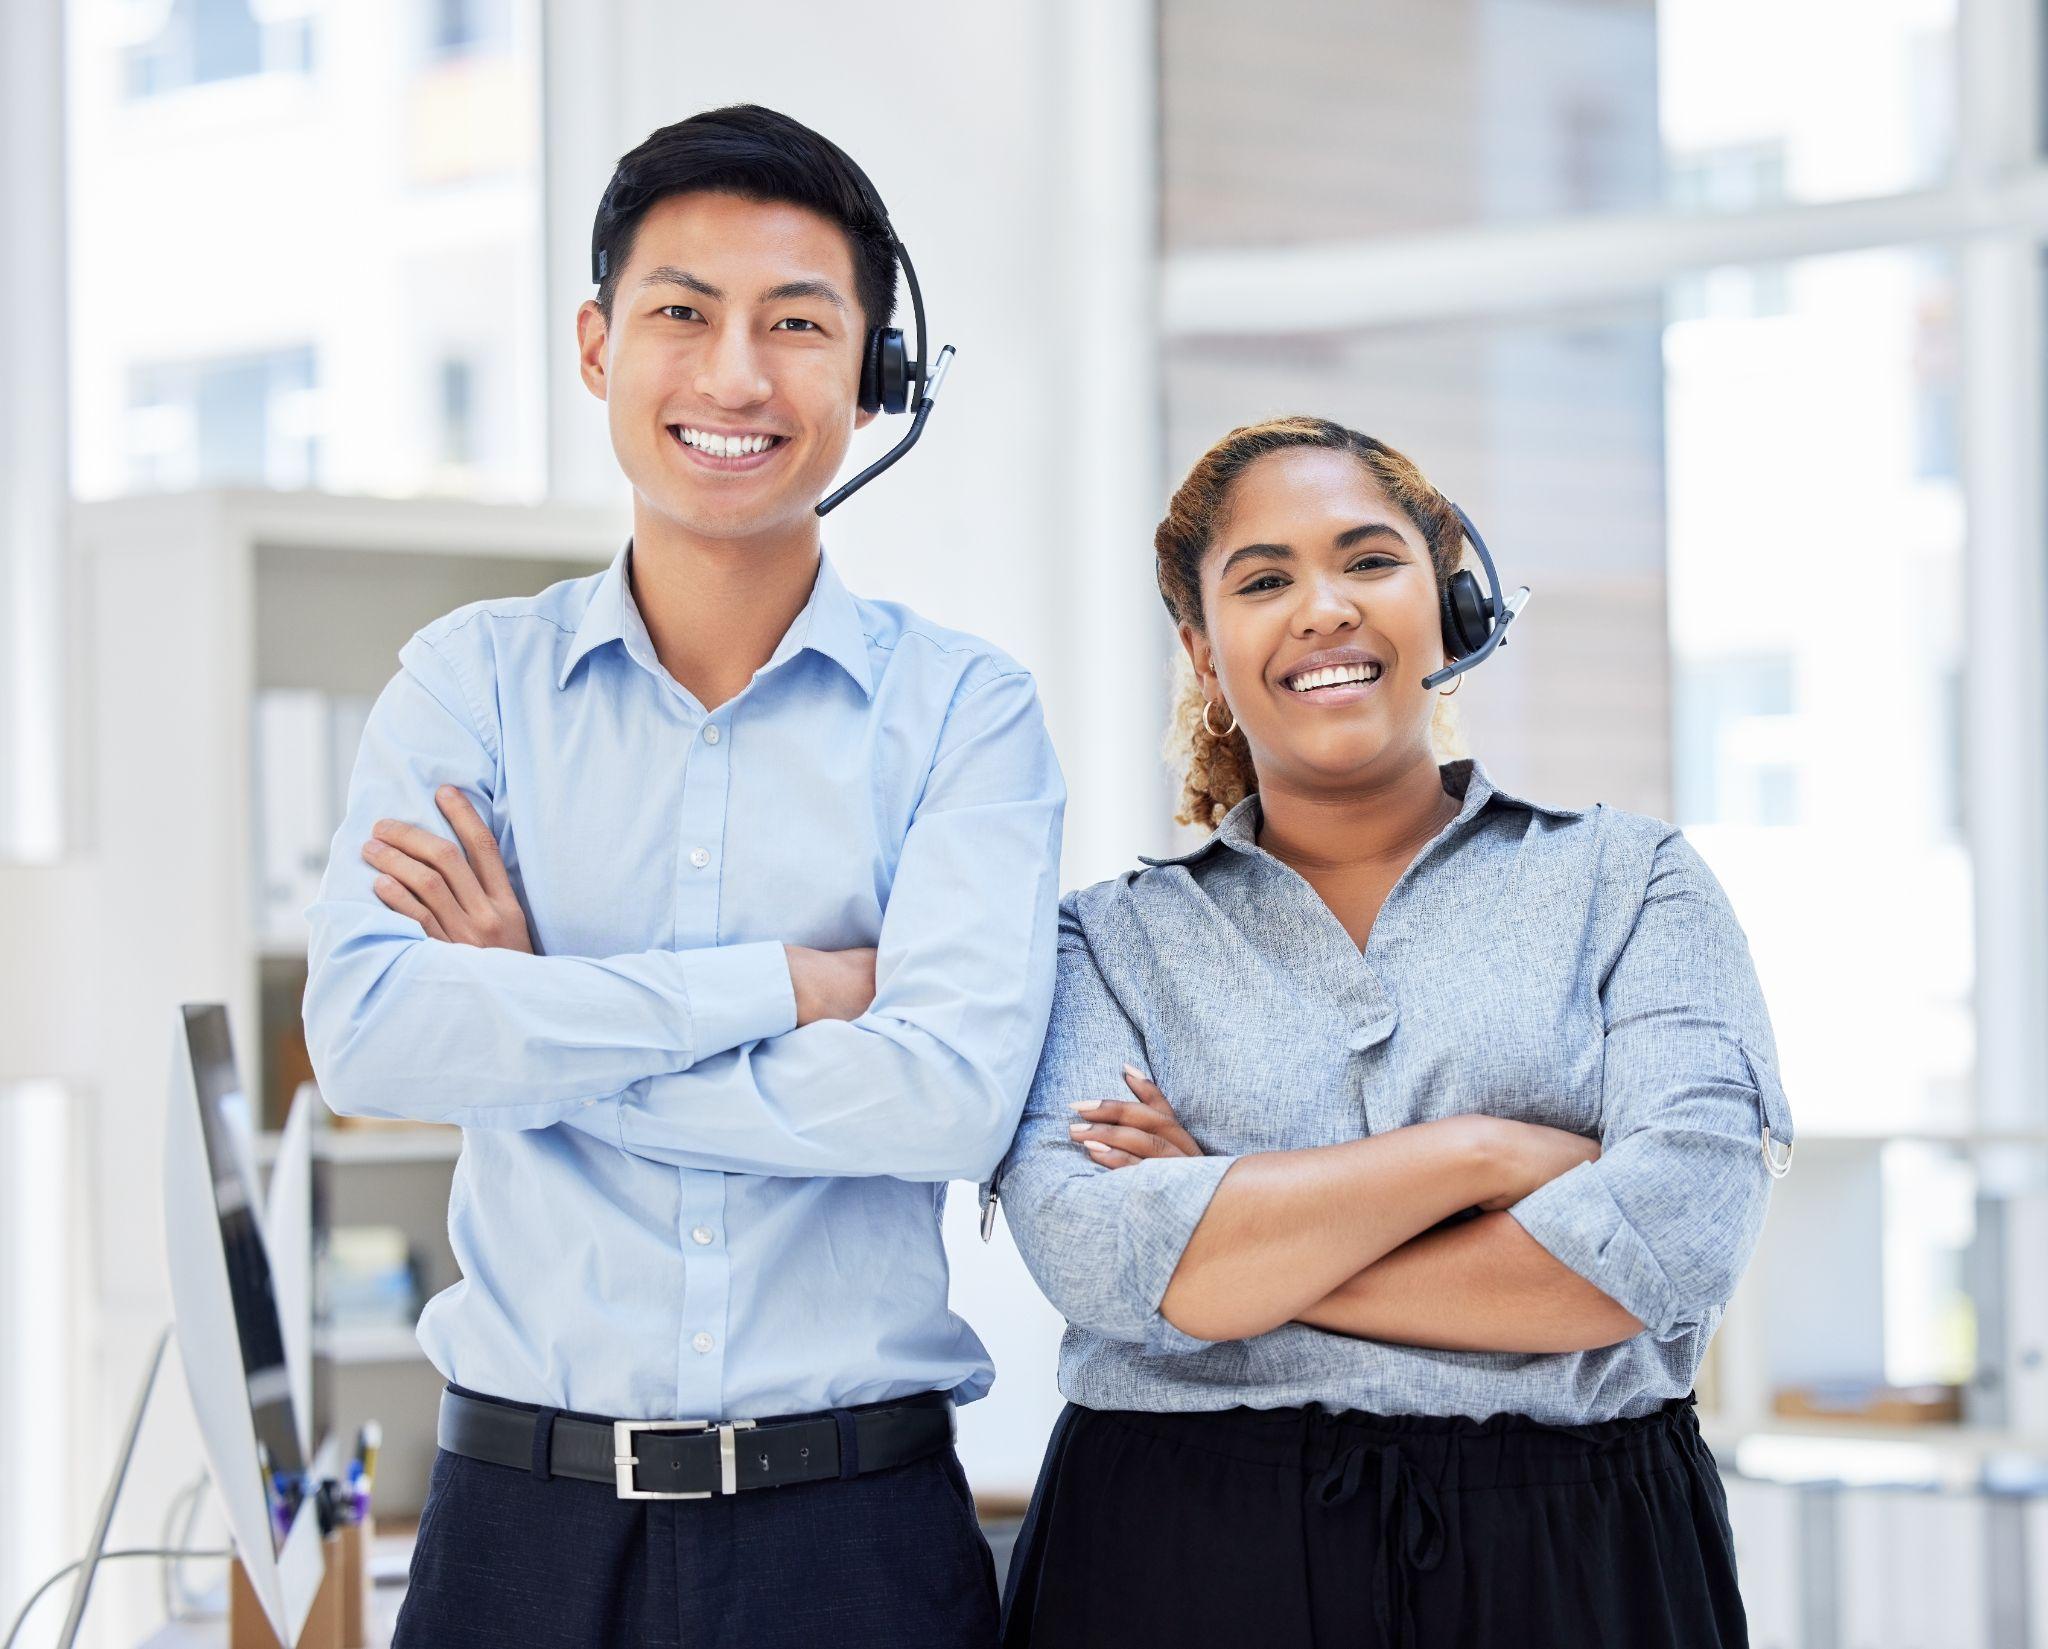 Two answering service agents with crossed arms and headsets.